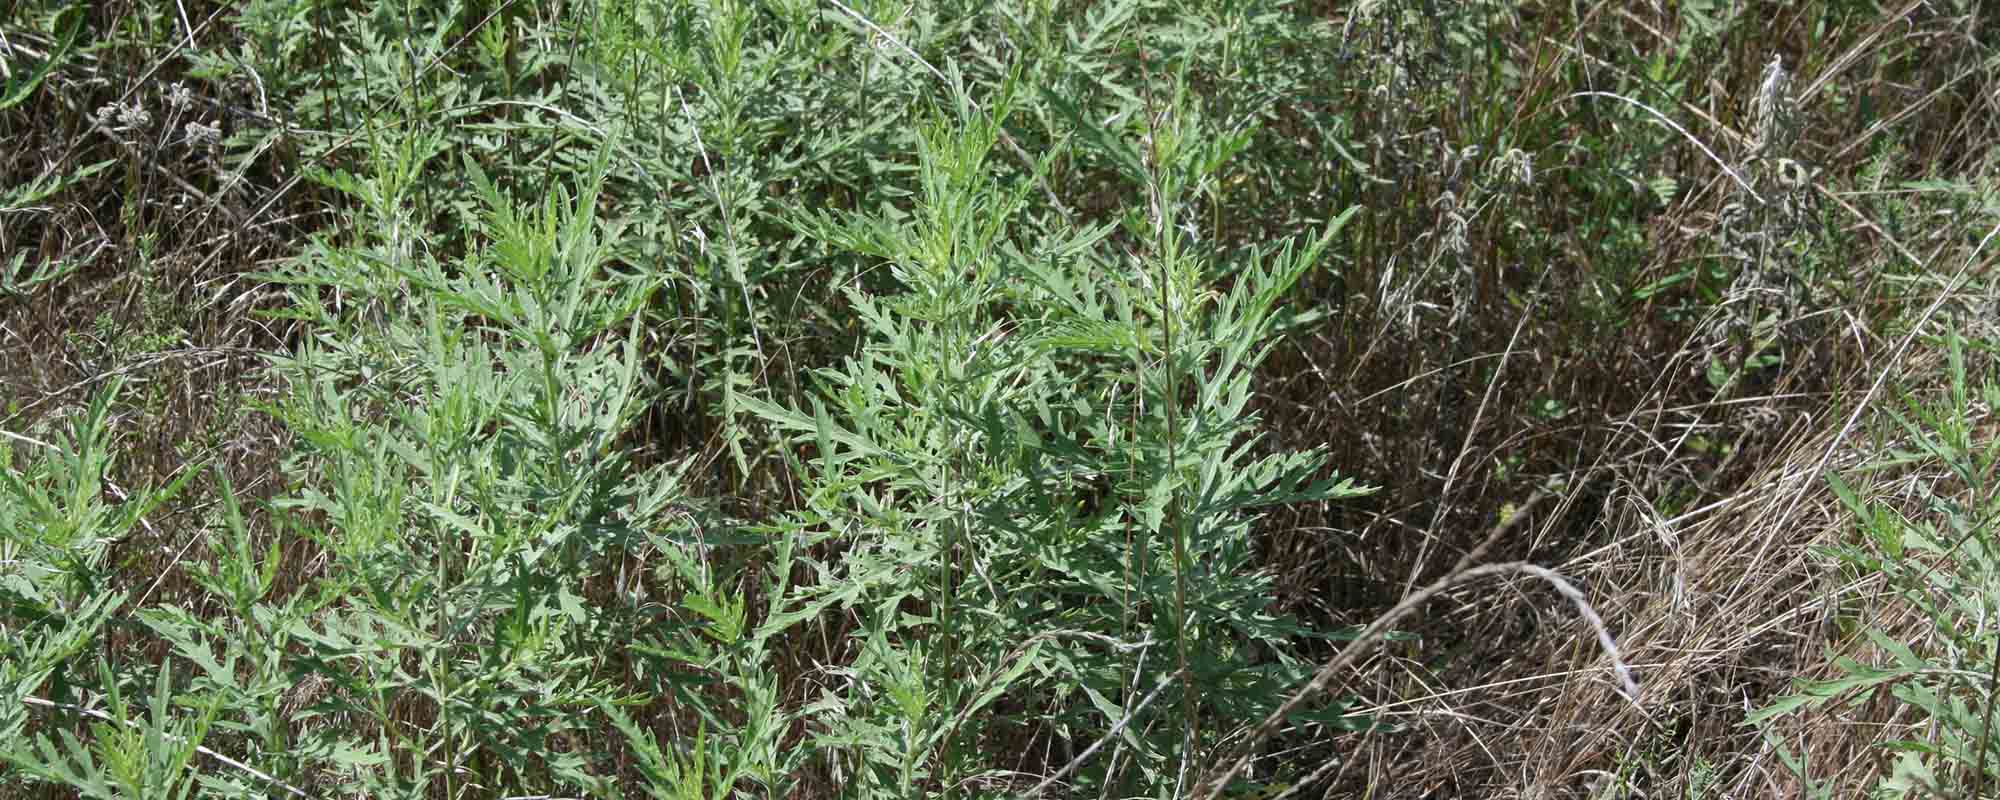 Quality of Native Plant Forage Species Important to White-tailed Deer and Goats in South Central Oklahoma